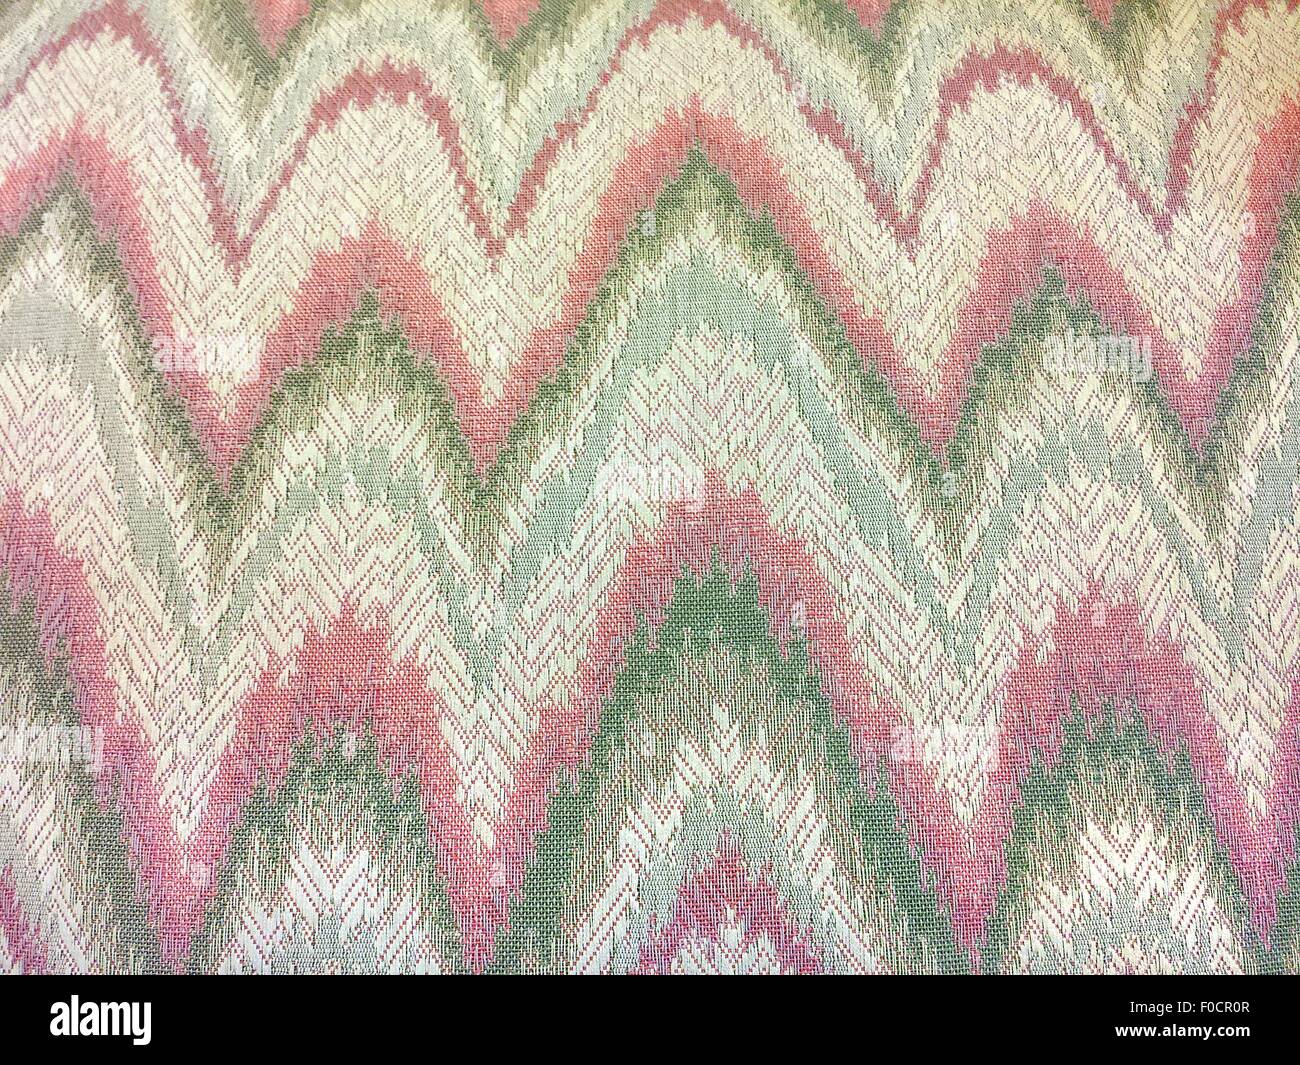 Abstract zigzag pattern for upholstery fabric. Stock Photo